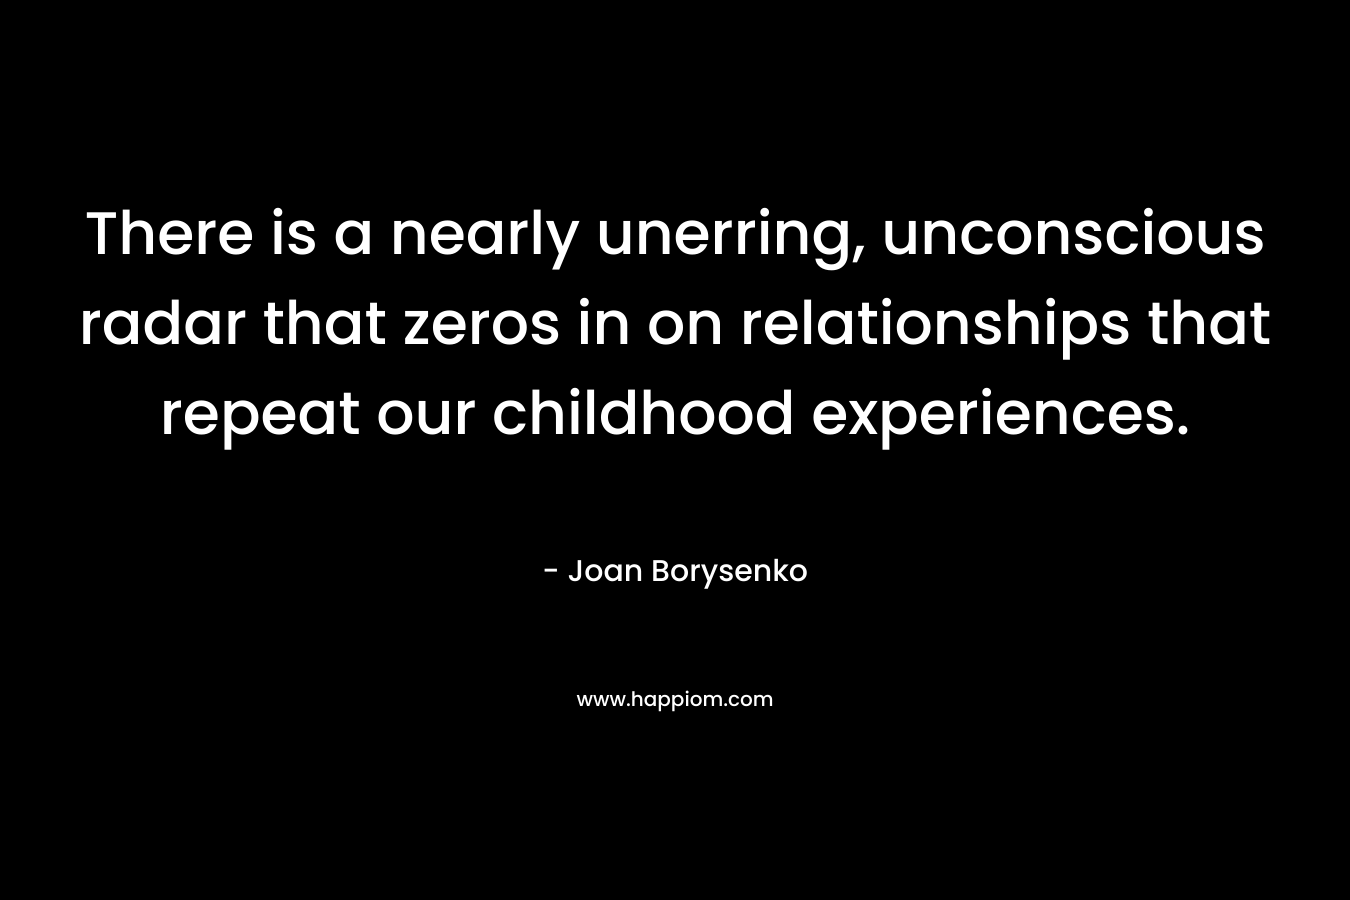 There is a nearly unerring, unconscious radar that zeros in on relationships that repeat our childhood experiences. – Joan Borysenko